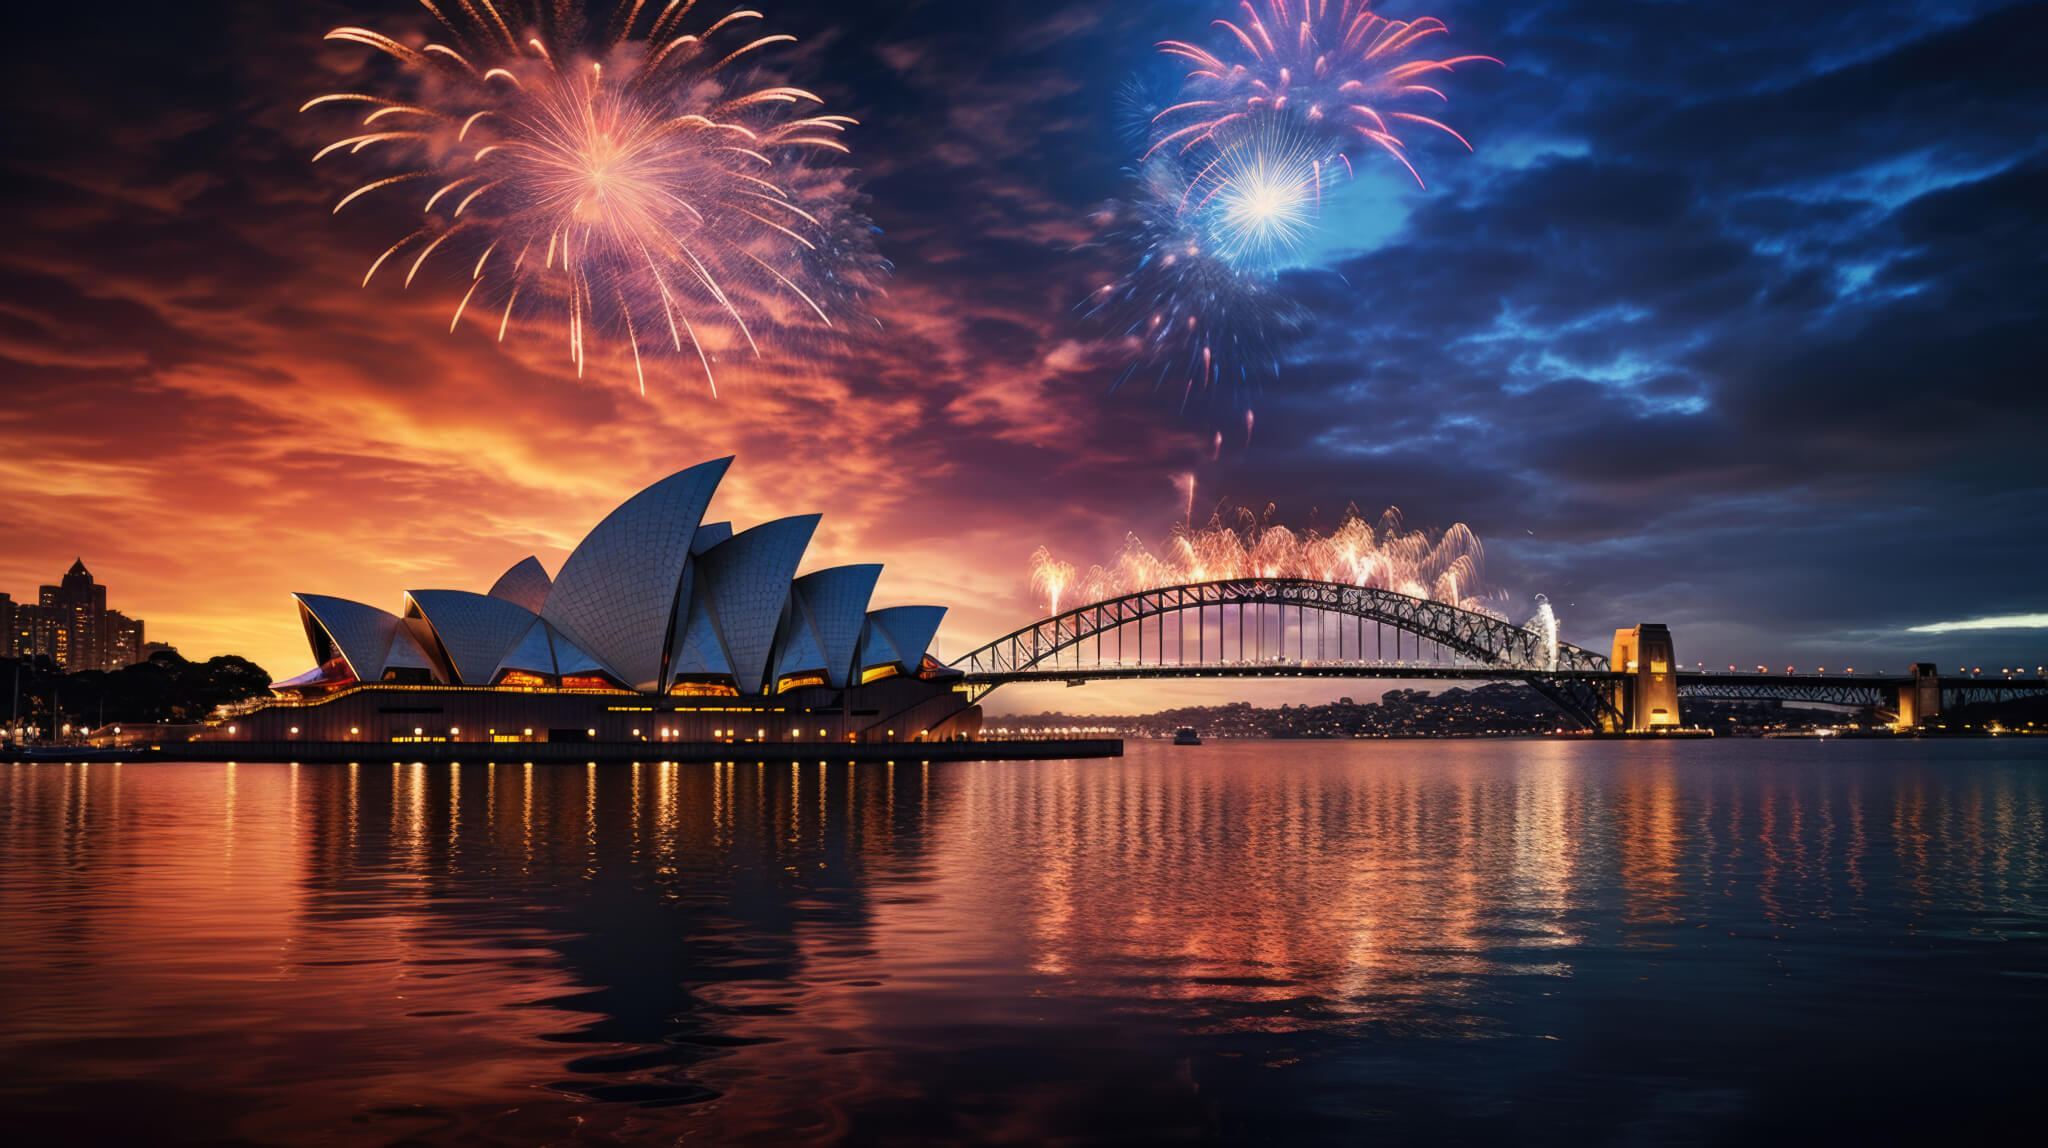 New Year's Eve fireworks in Australia, reflections in the water and a back in the middle